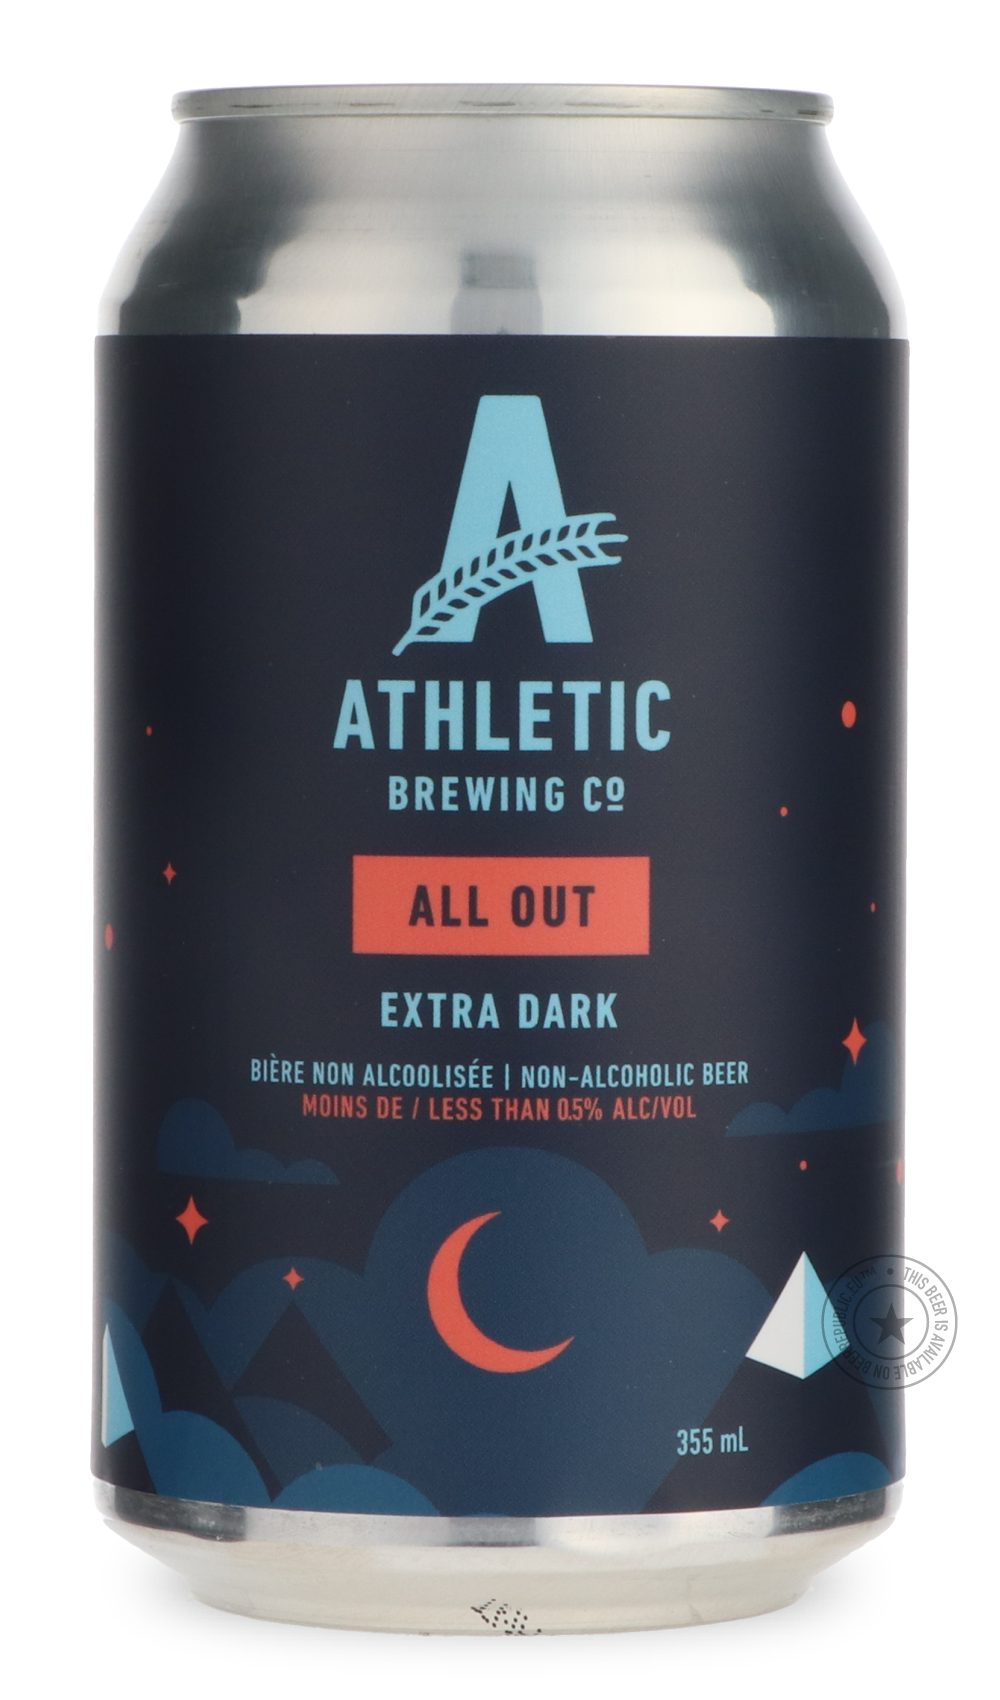 -Athletic- All Out Extra Dark-Specials- Only @ Beer Republic - The best online beer store for American & Canadian craft beer - Buy beer online from the USA and Canada - Bier online kopen - Amerikaans bier kopen - Craft beer store - Craft beer kopen - Amerikanisch bier kaufen - Bier online kaufen - Acheter biere online - IPA - Stout - Porter - New England IPA - Hazy IPA - Imperial Stout - Barrel Aged - Barrel Aged Imperial Stout - Brown - Dark beer - Blond - Blonde - Pilsner - Lager - Wheat - Weizen - Amber 